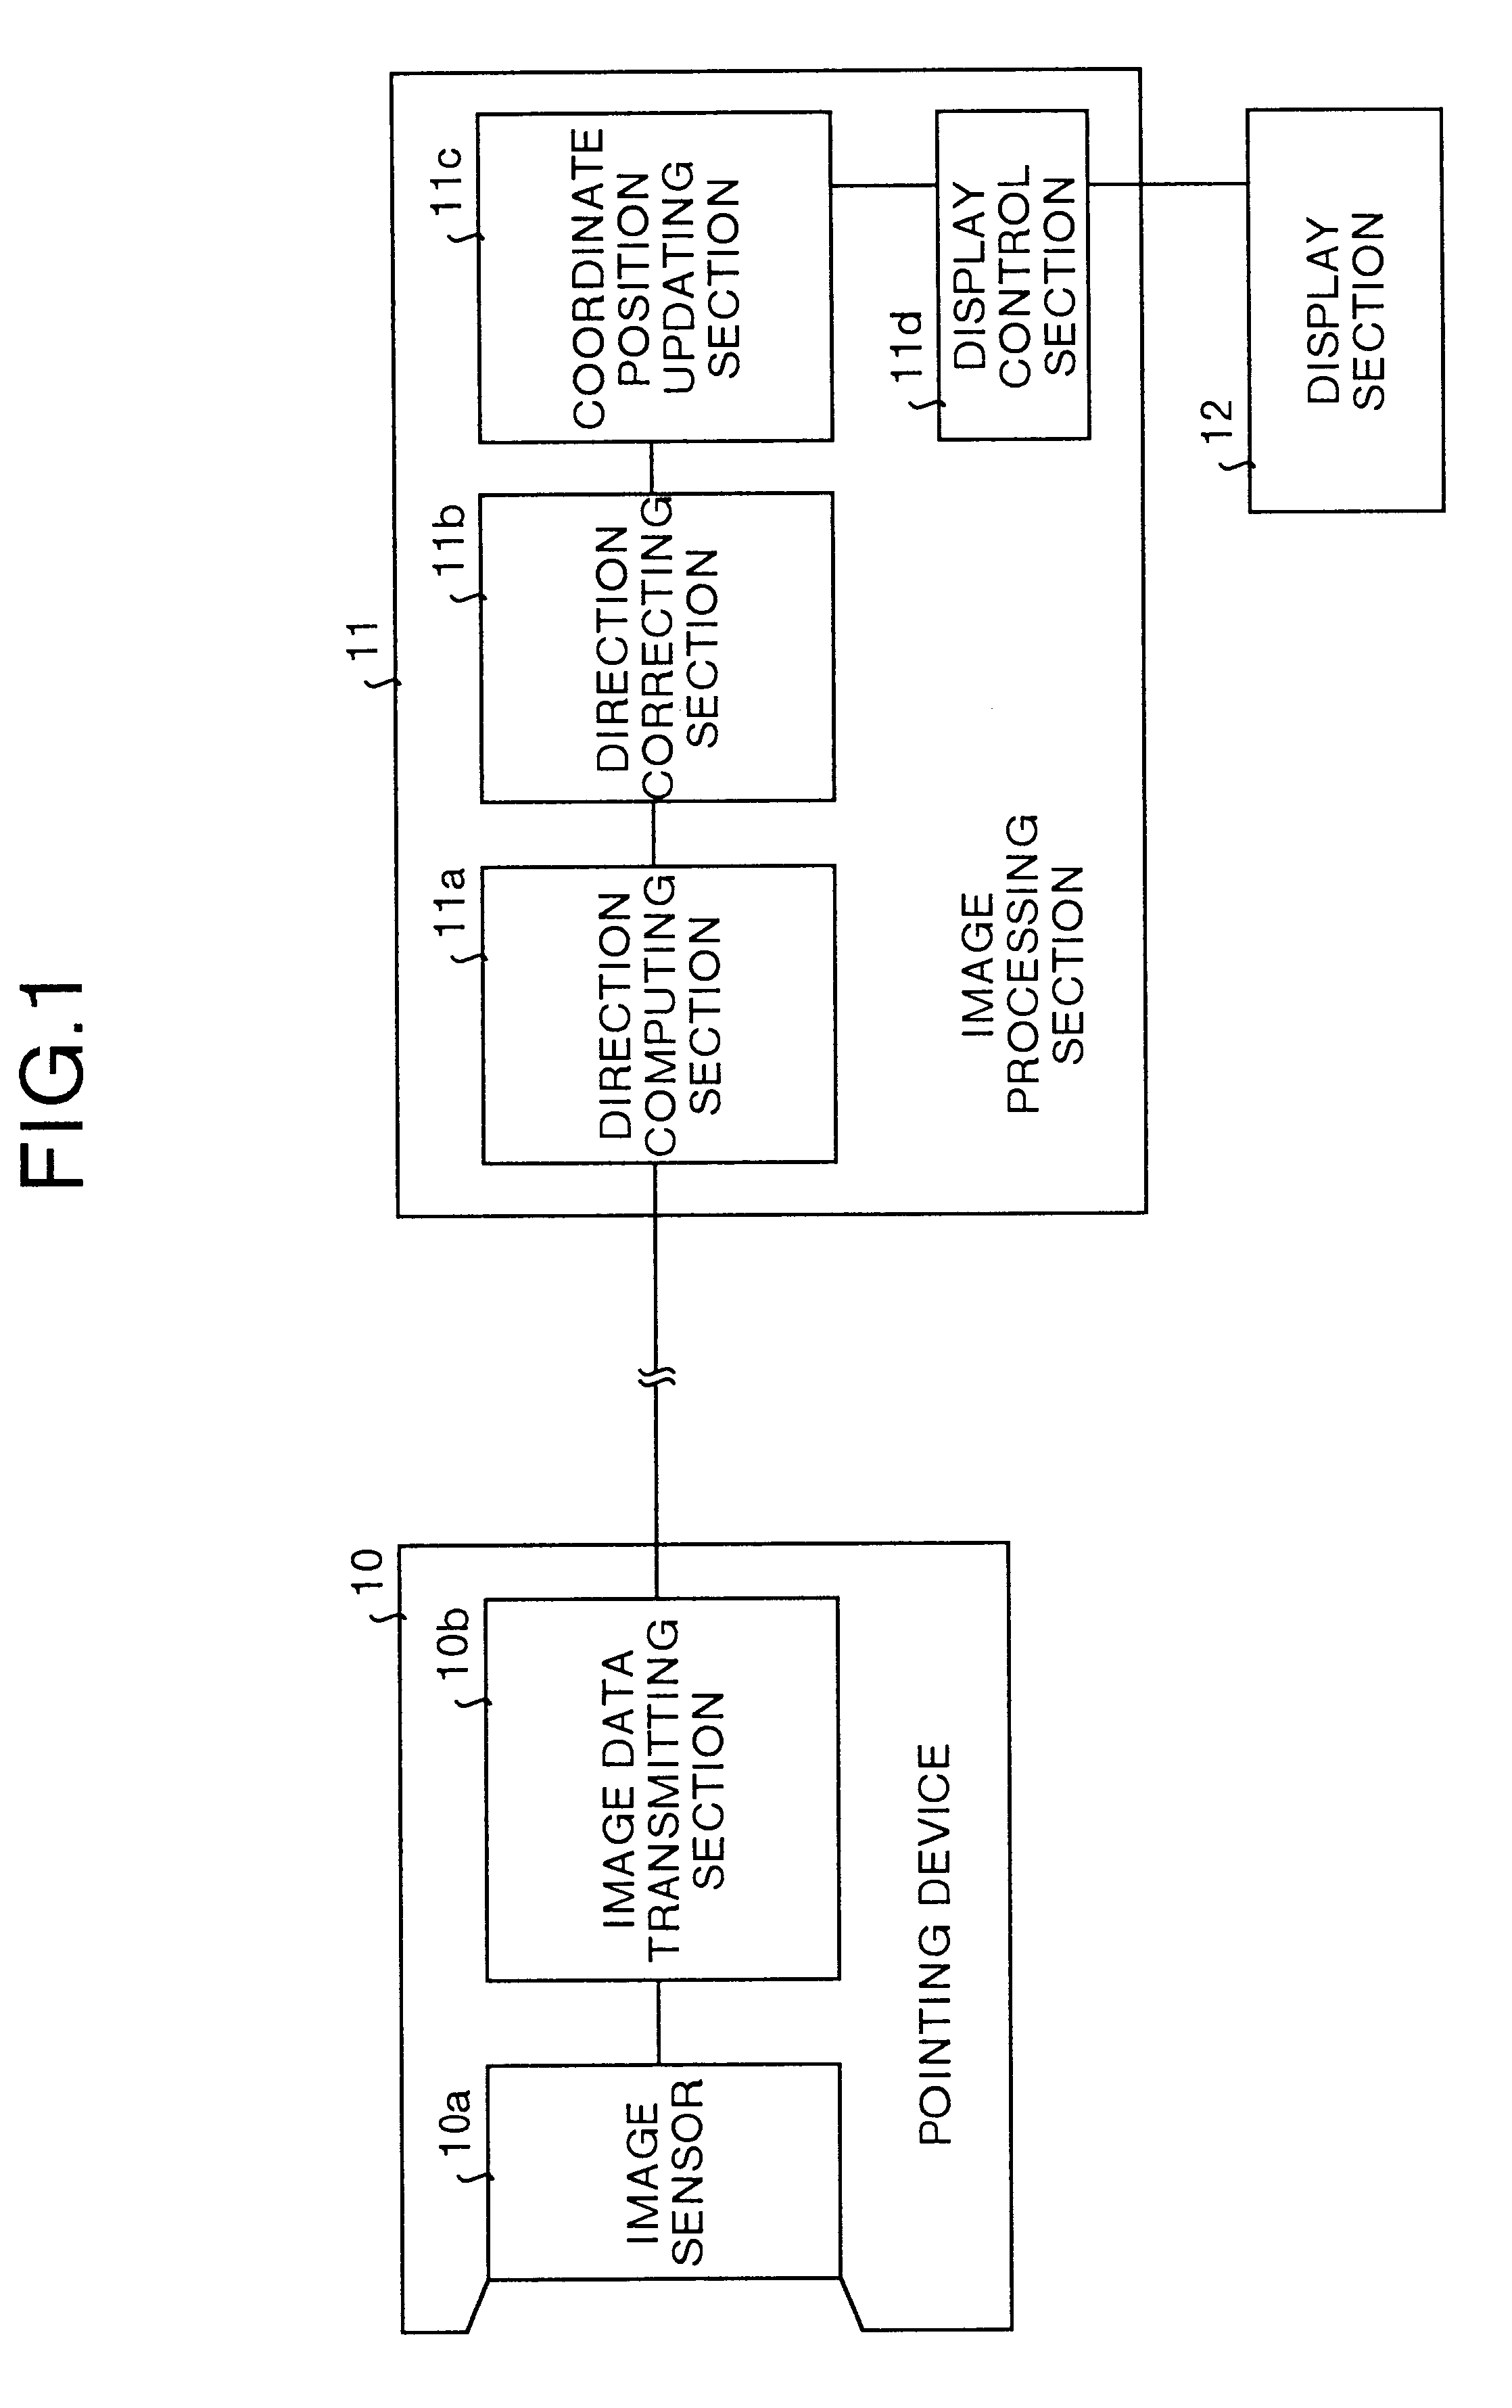 Coordinated position control system, coordinate position control method, and computer-readable storage medium containing a computer program for coordinate position controlling recorded thereon